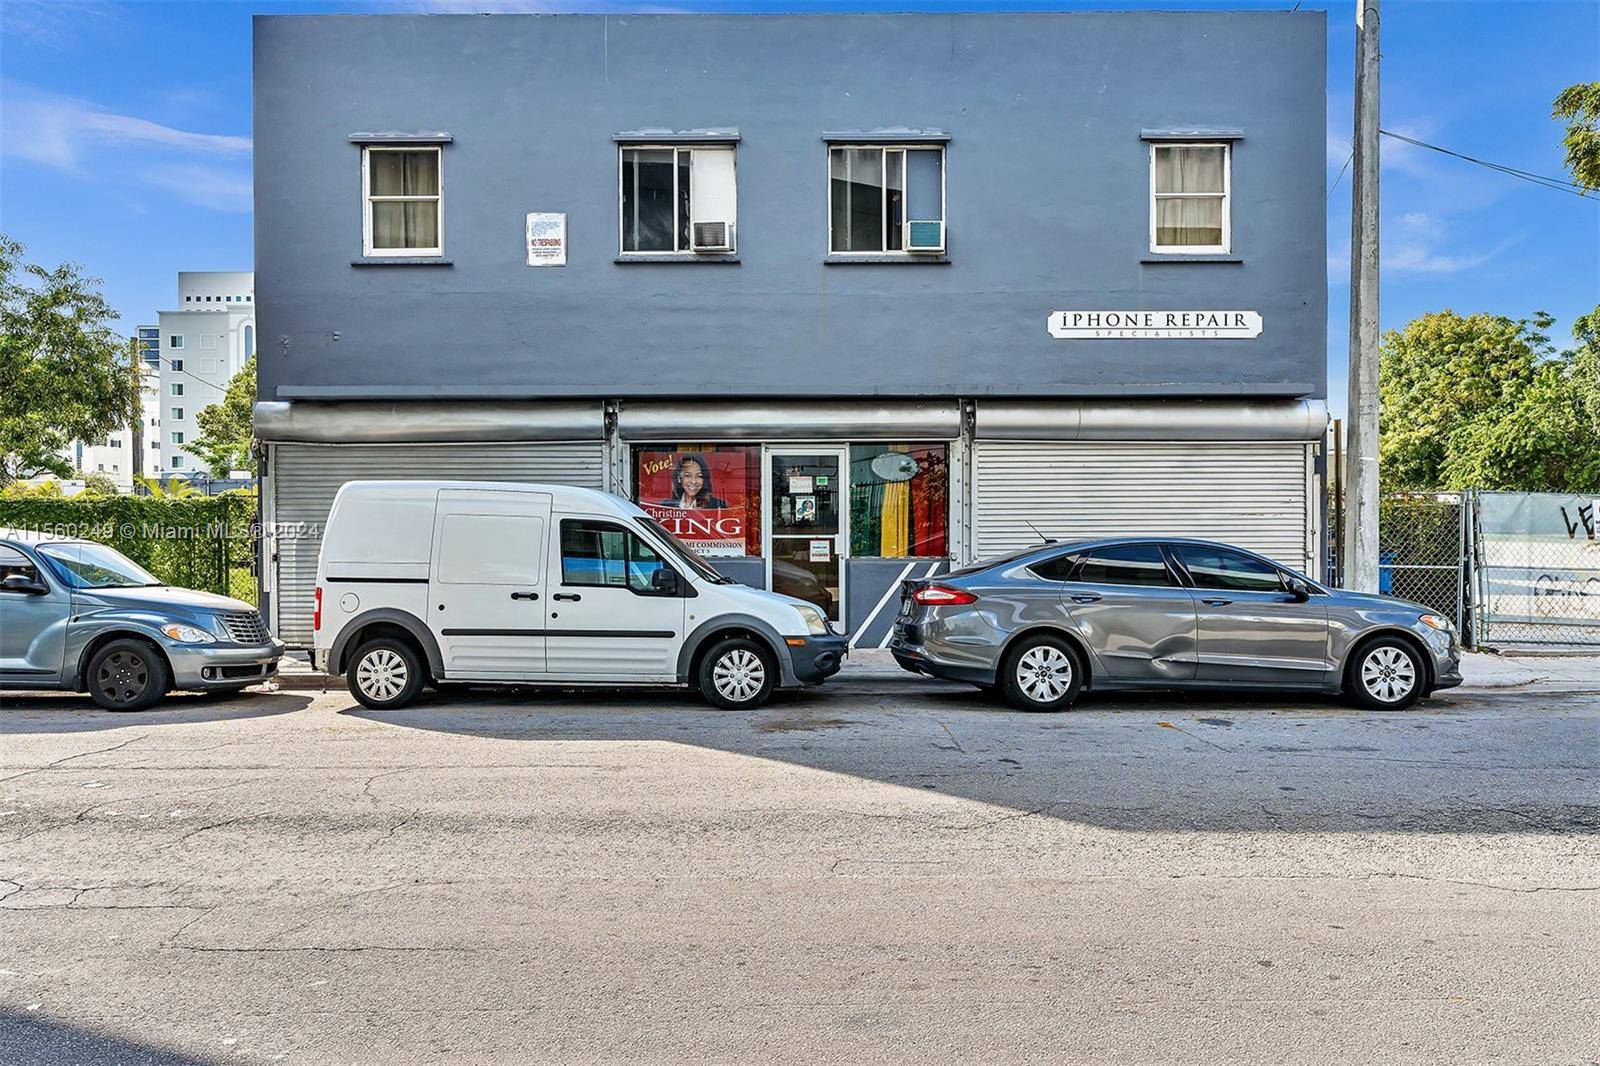 Overtown, Centrally located 2 story self standing building with three 3 For Lease available spaces downstairs which can be used for multiple types of businesses.